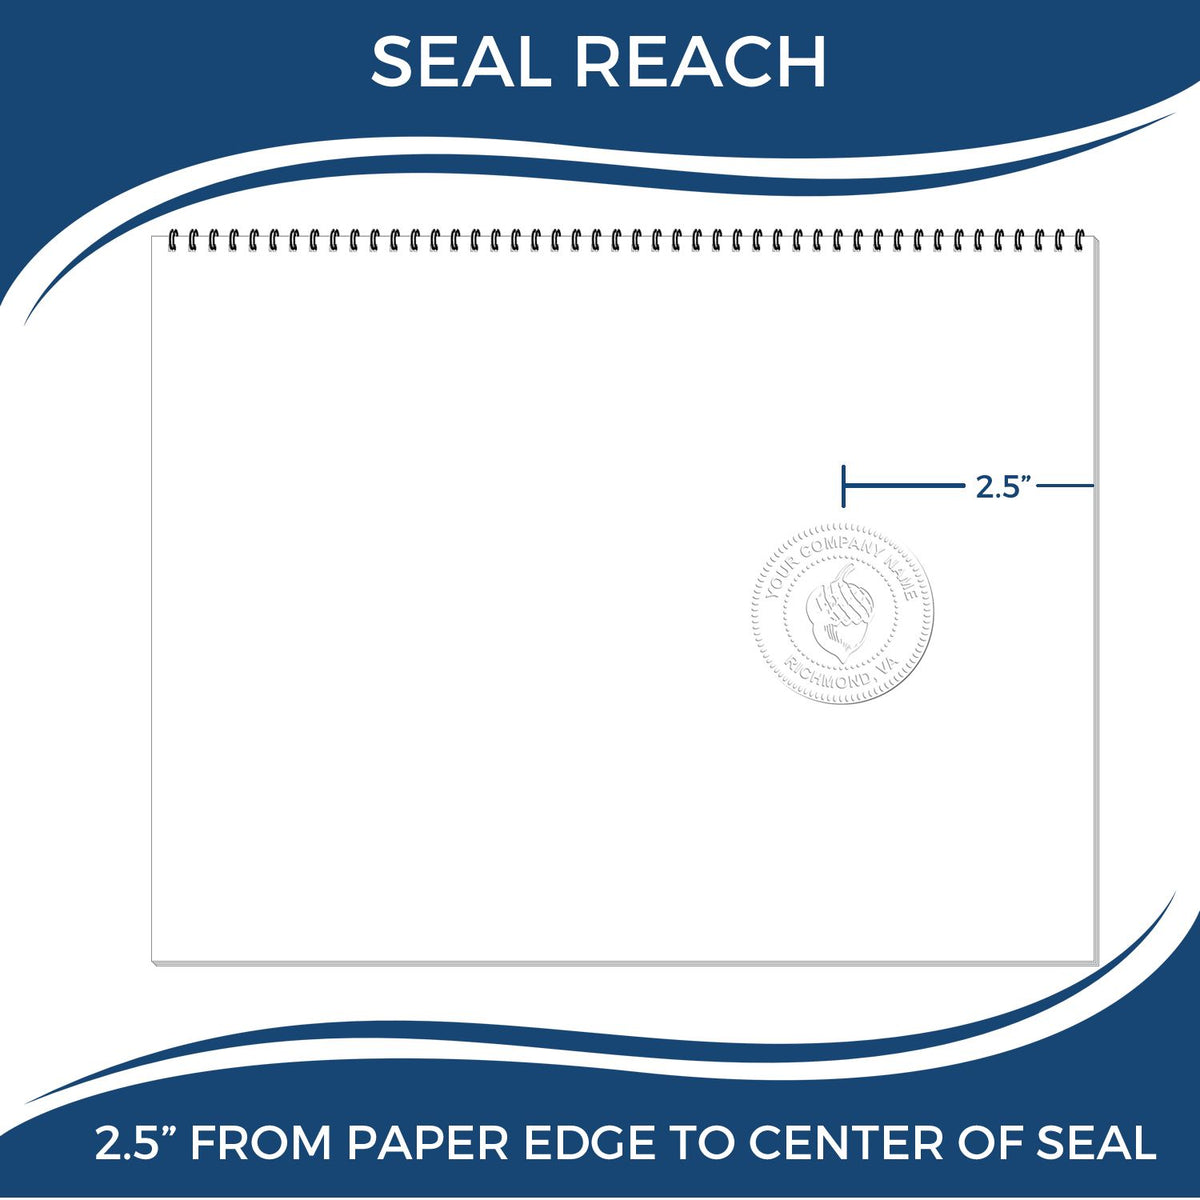 An infographic showing the seal reach which is represented by a ruler and a miniature seal image of the Heavy Duty Cast Iron Massachusetts Land Surveyor Seal Embosser